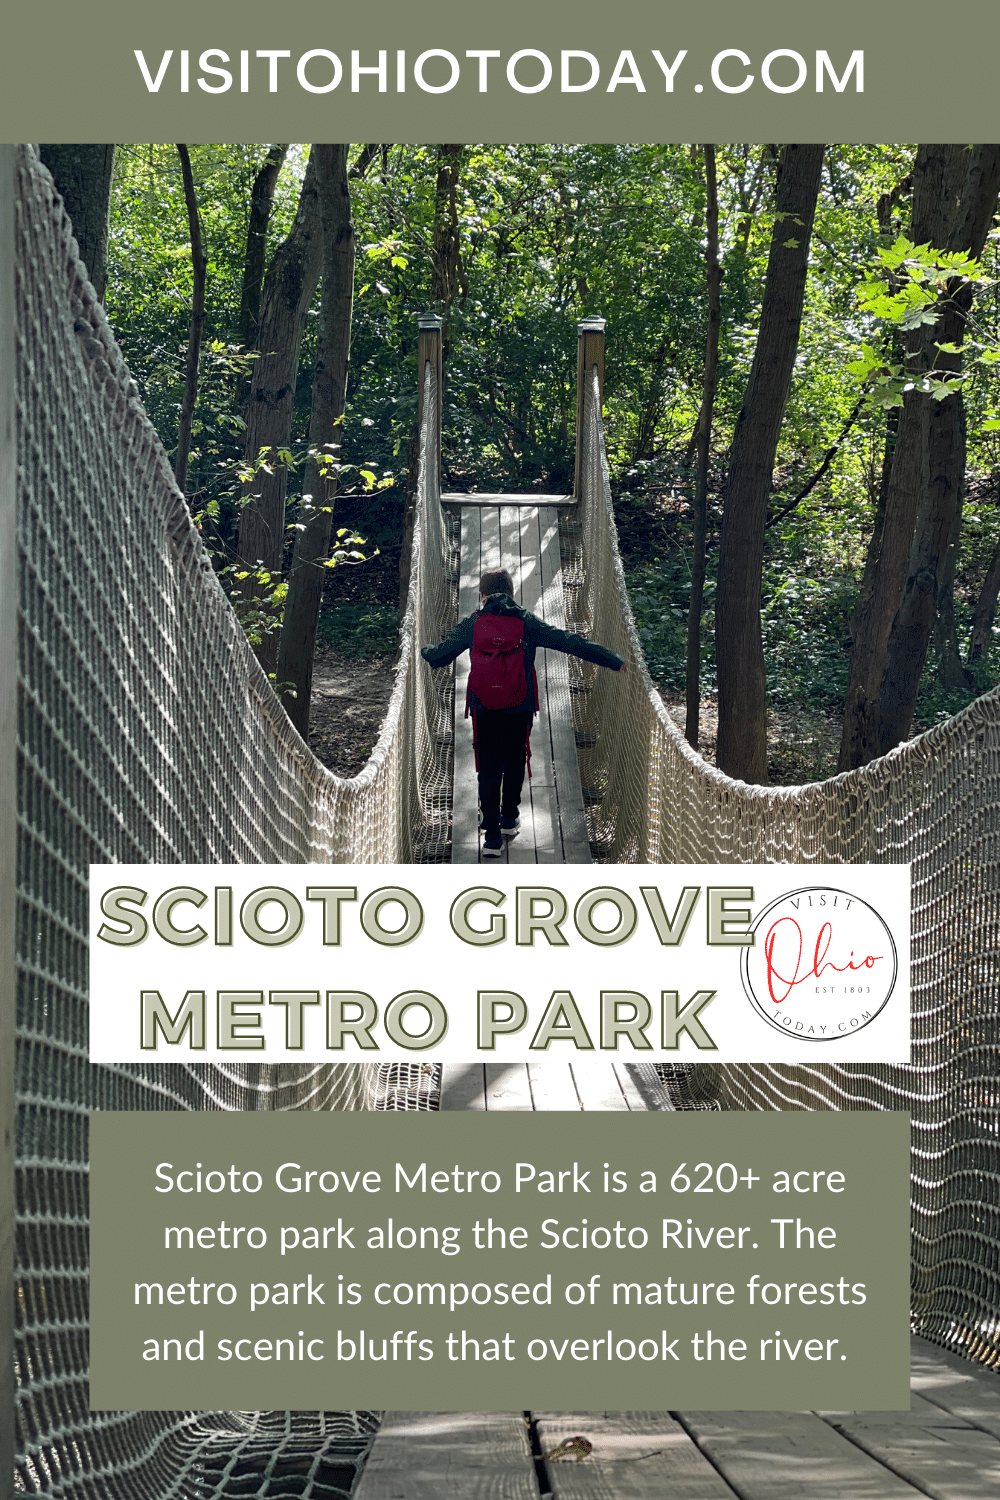 Scioto Grove Metro Park is a 620+ acre metro park along the Scioto River. The metro park  is composed of mature forests and scenic bluffs that overlook the river.  #metropark #ohio #ohiopark #sciotogrove #REItrail #hiking